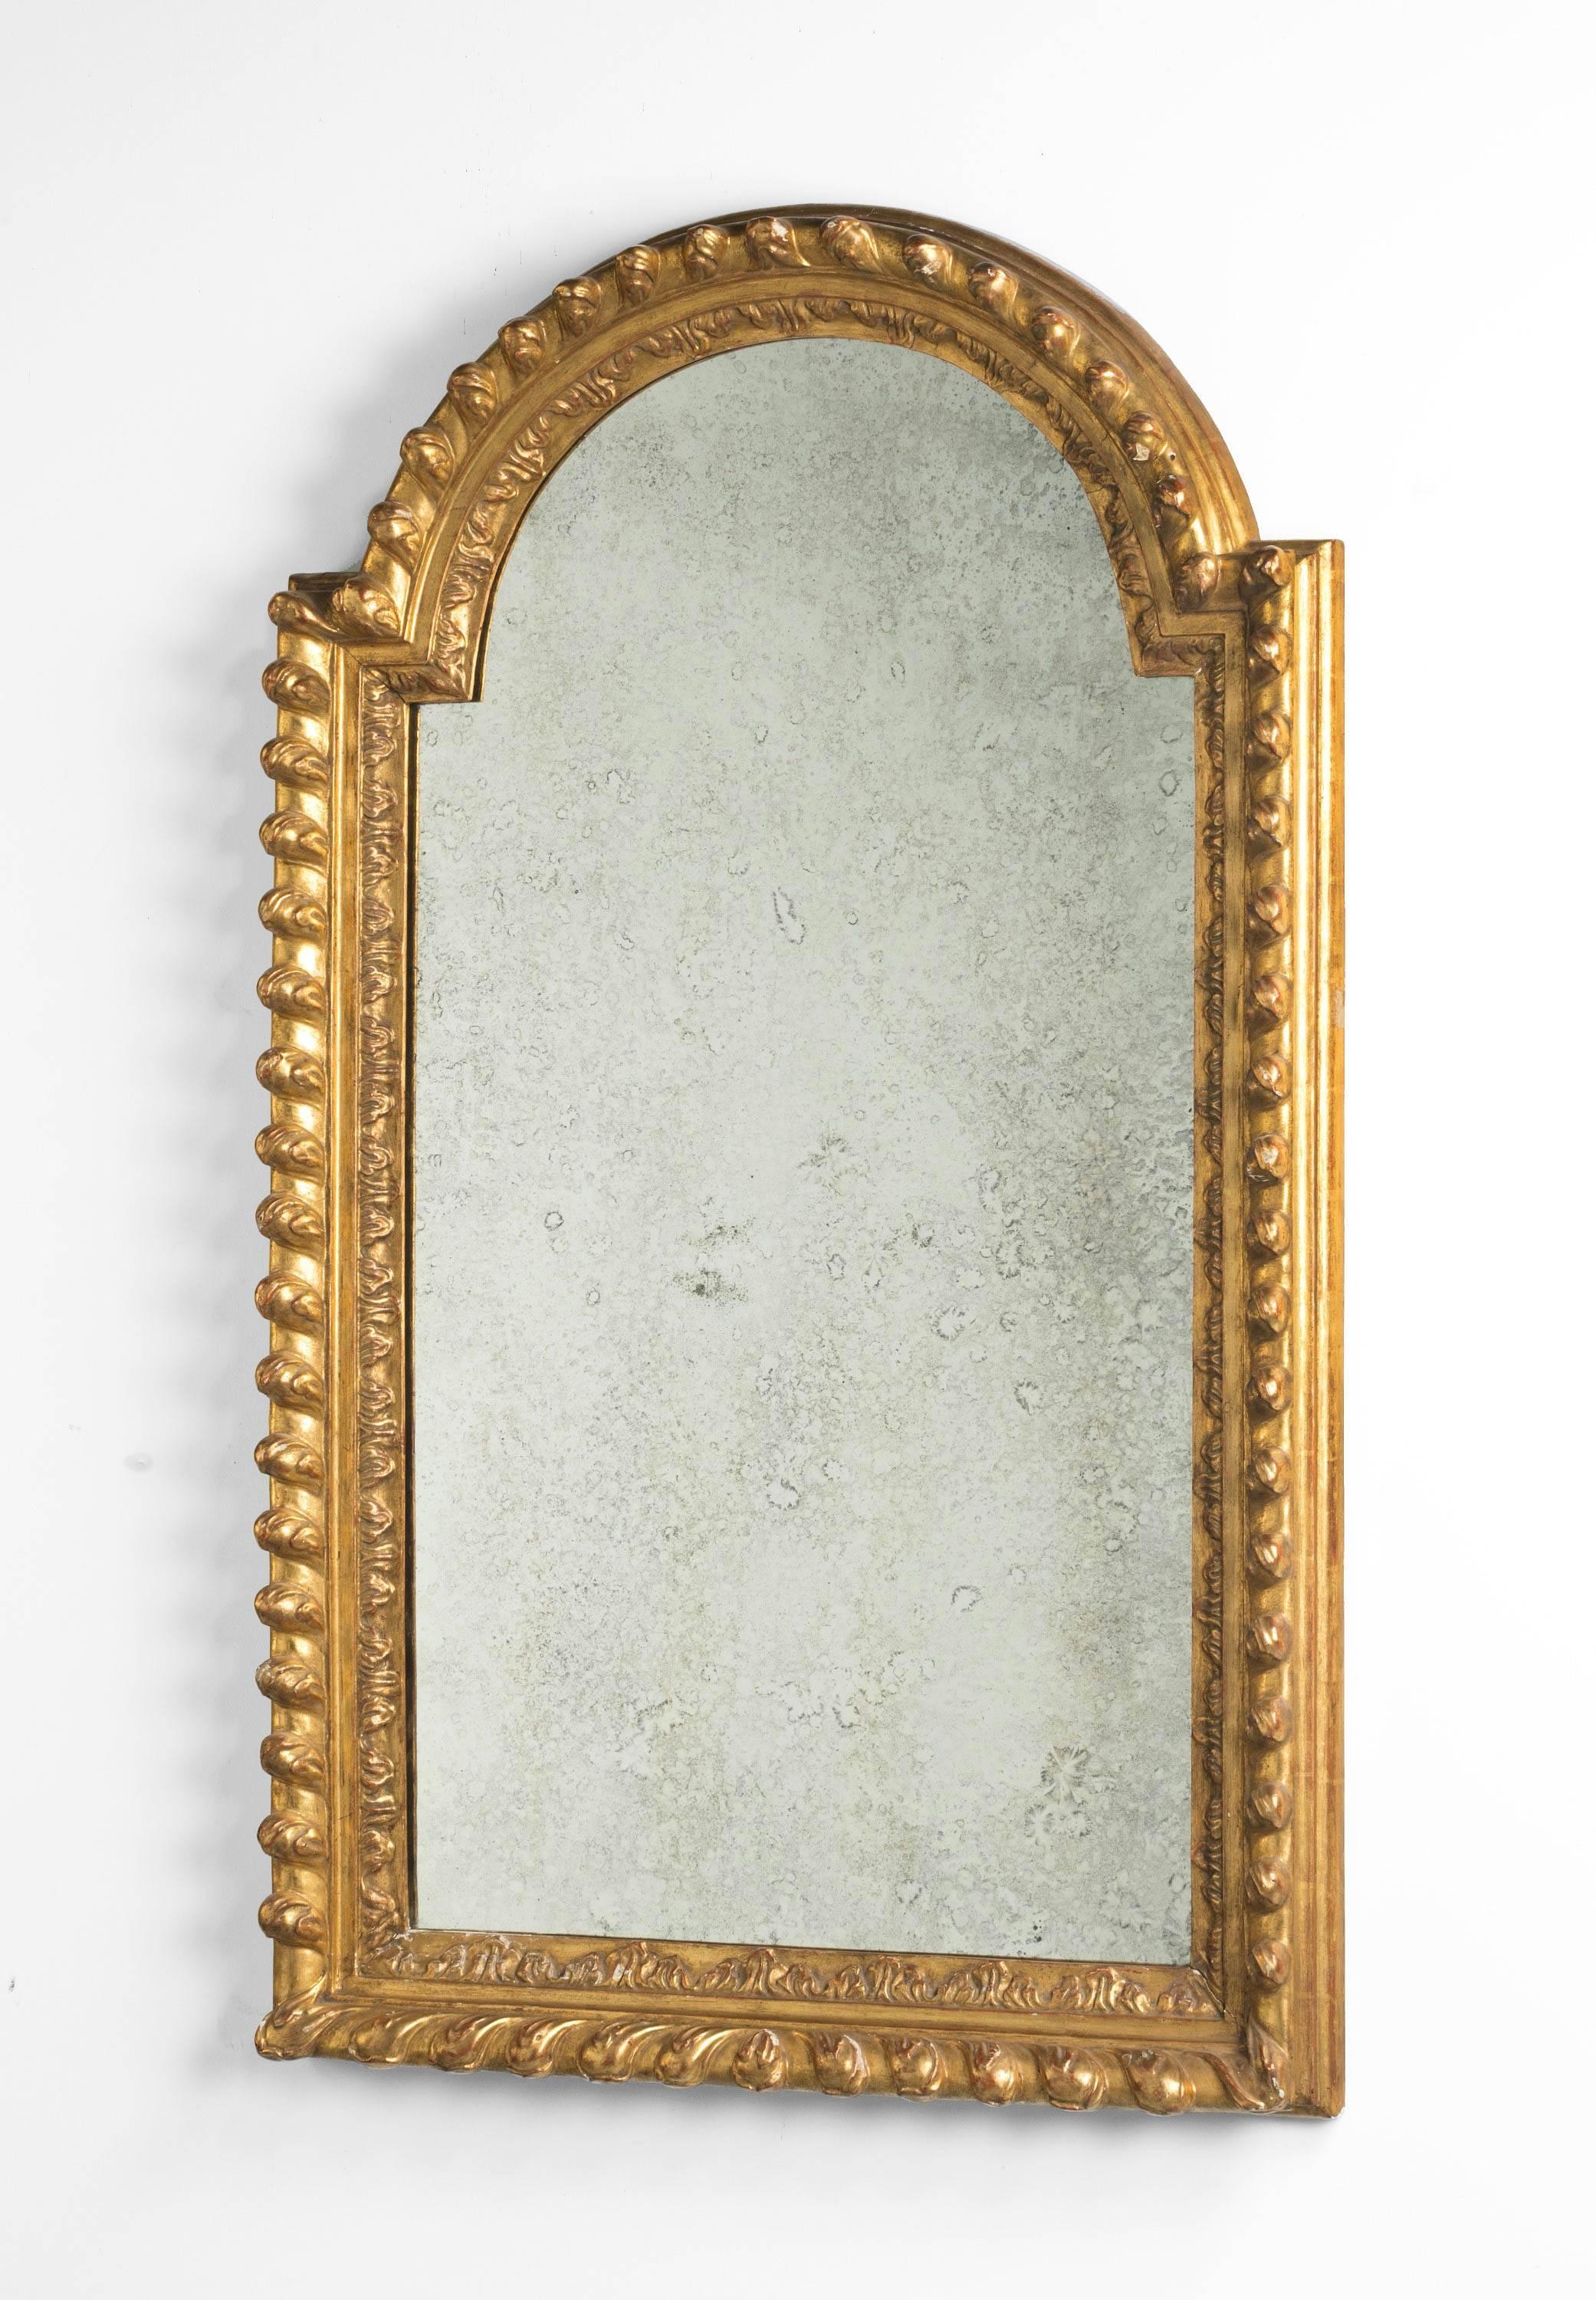 An attractive pair of mid-19th century giltwood and gesso mirrors. Largely with original gilding which is oil based. Well carved edges in excellent overall condition. Showing slight oxidation but in keeping with the period. 

N.